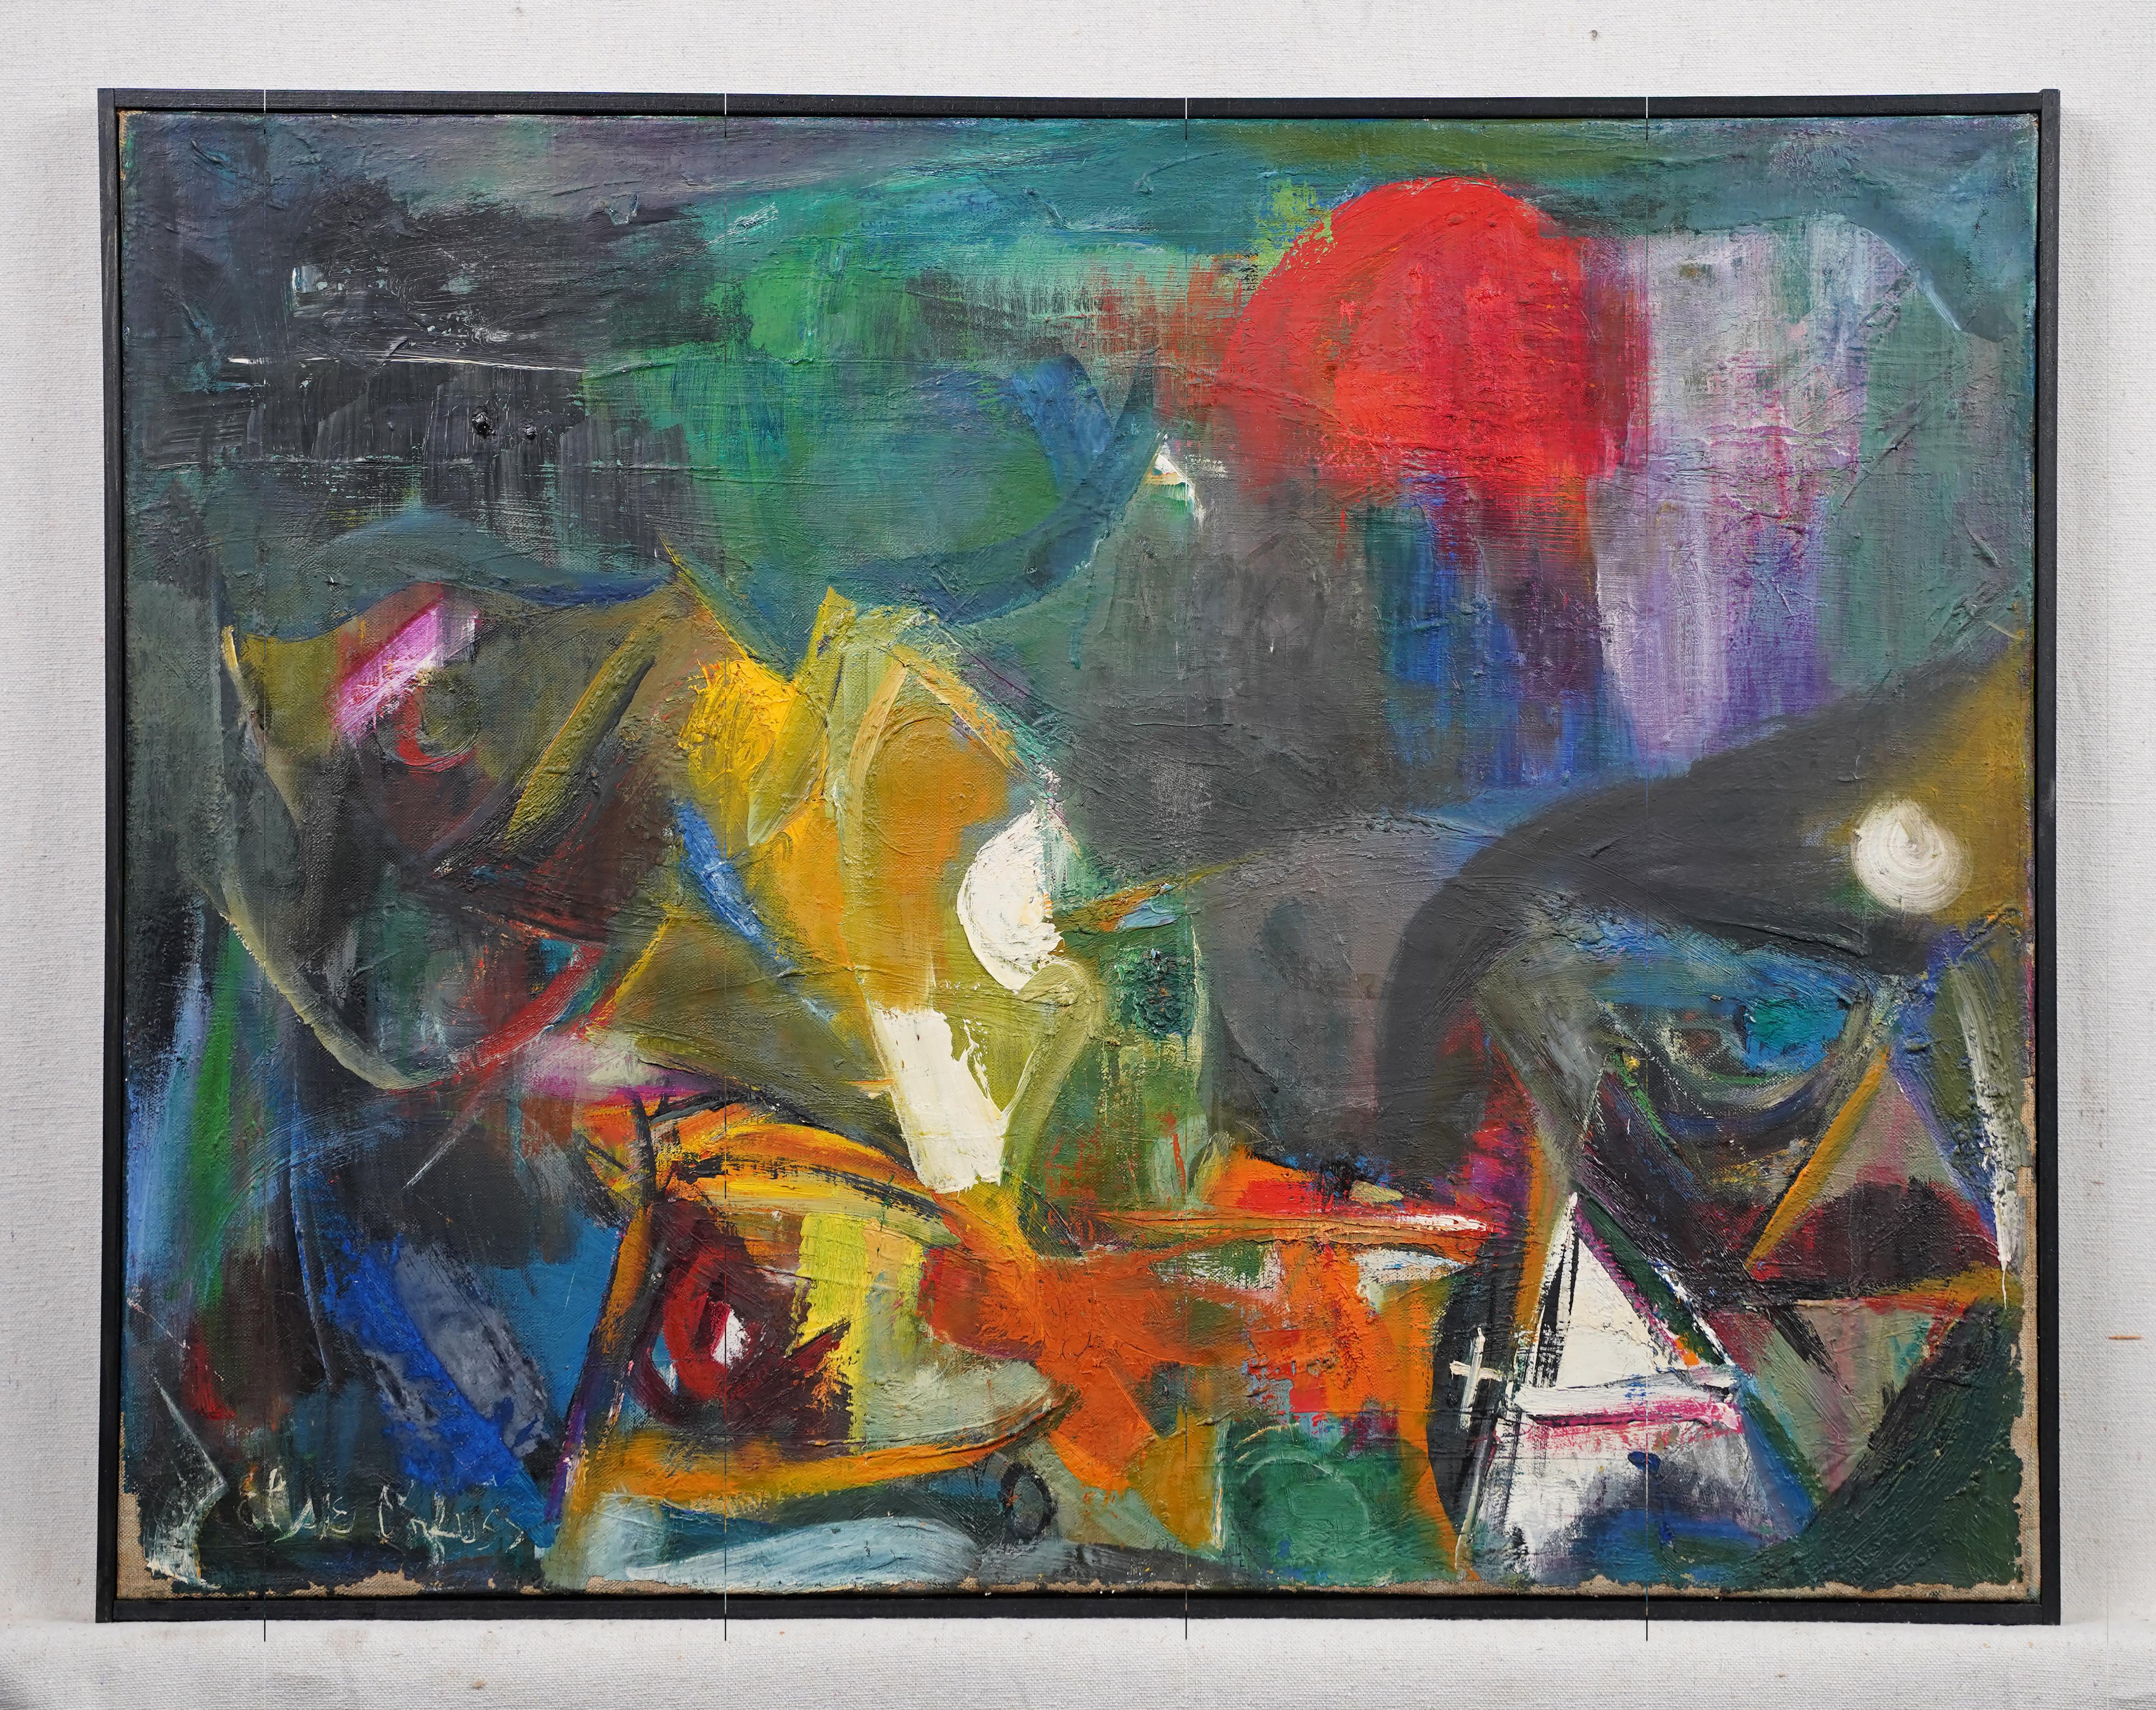 Antique American abstract expressionist signed oil painting.  Oil on canvas.  Signed.  Framed.  Image size, 26L x 20H.